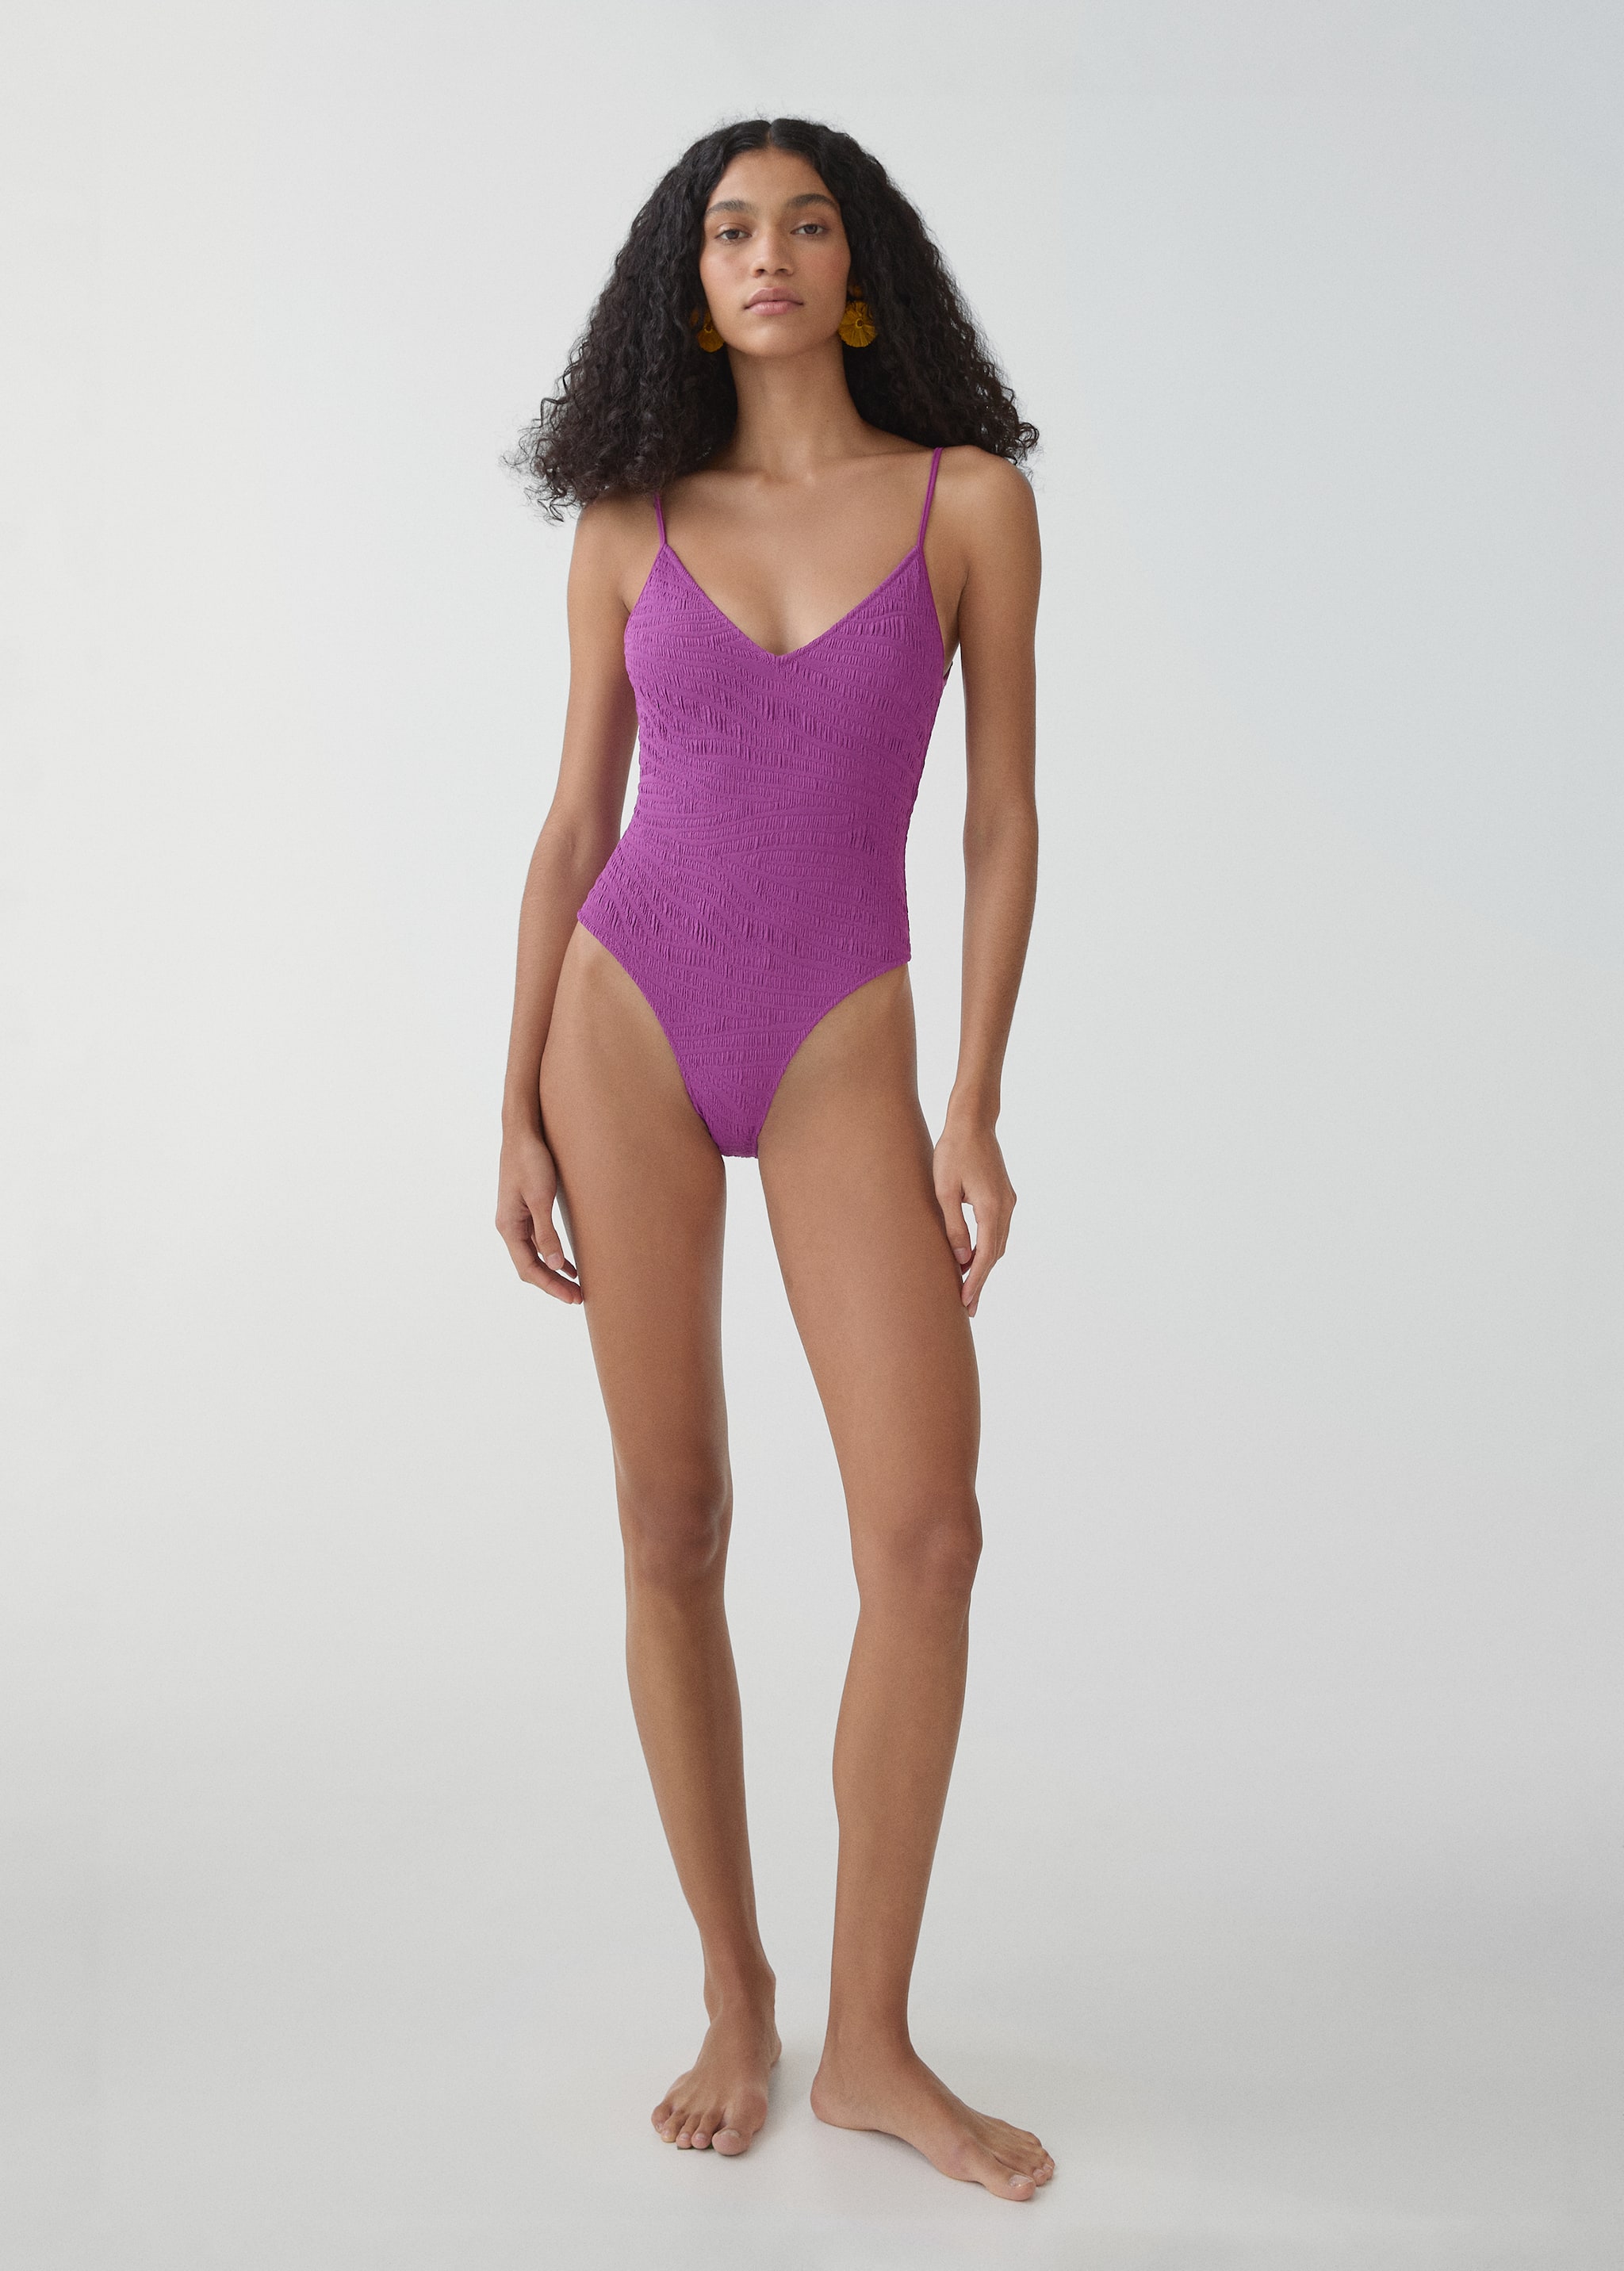 Textured swimsuit with adjustable straps - General plane